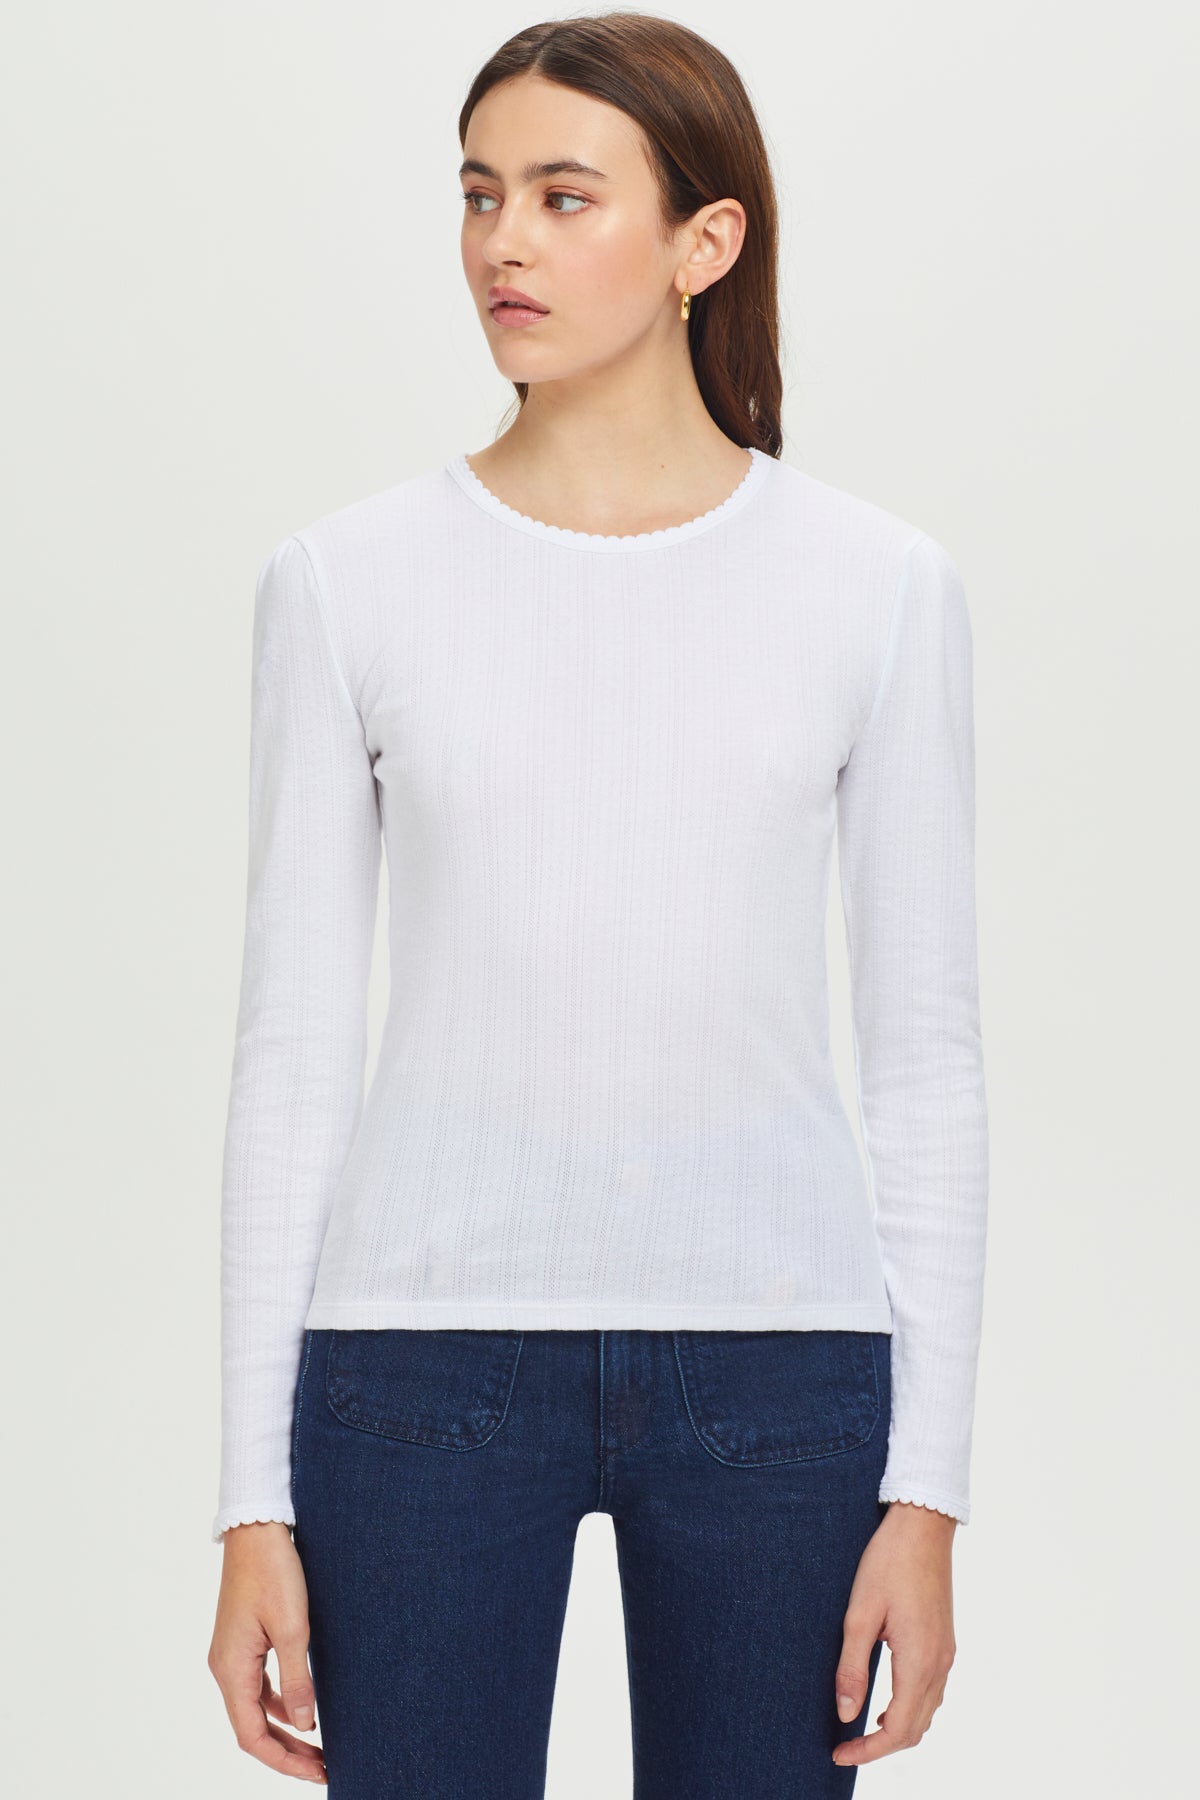 Cotton:On pointelle long sleeve top in gray